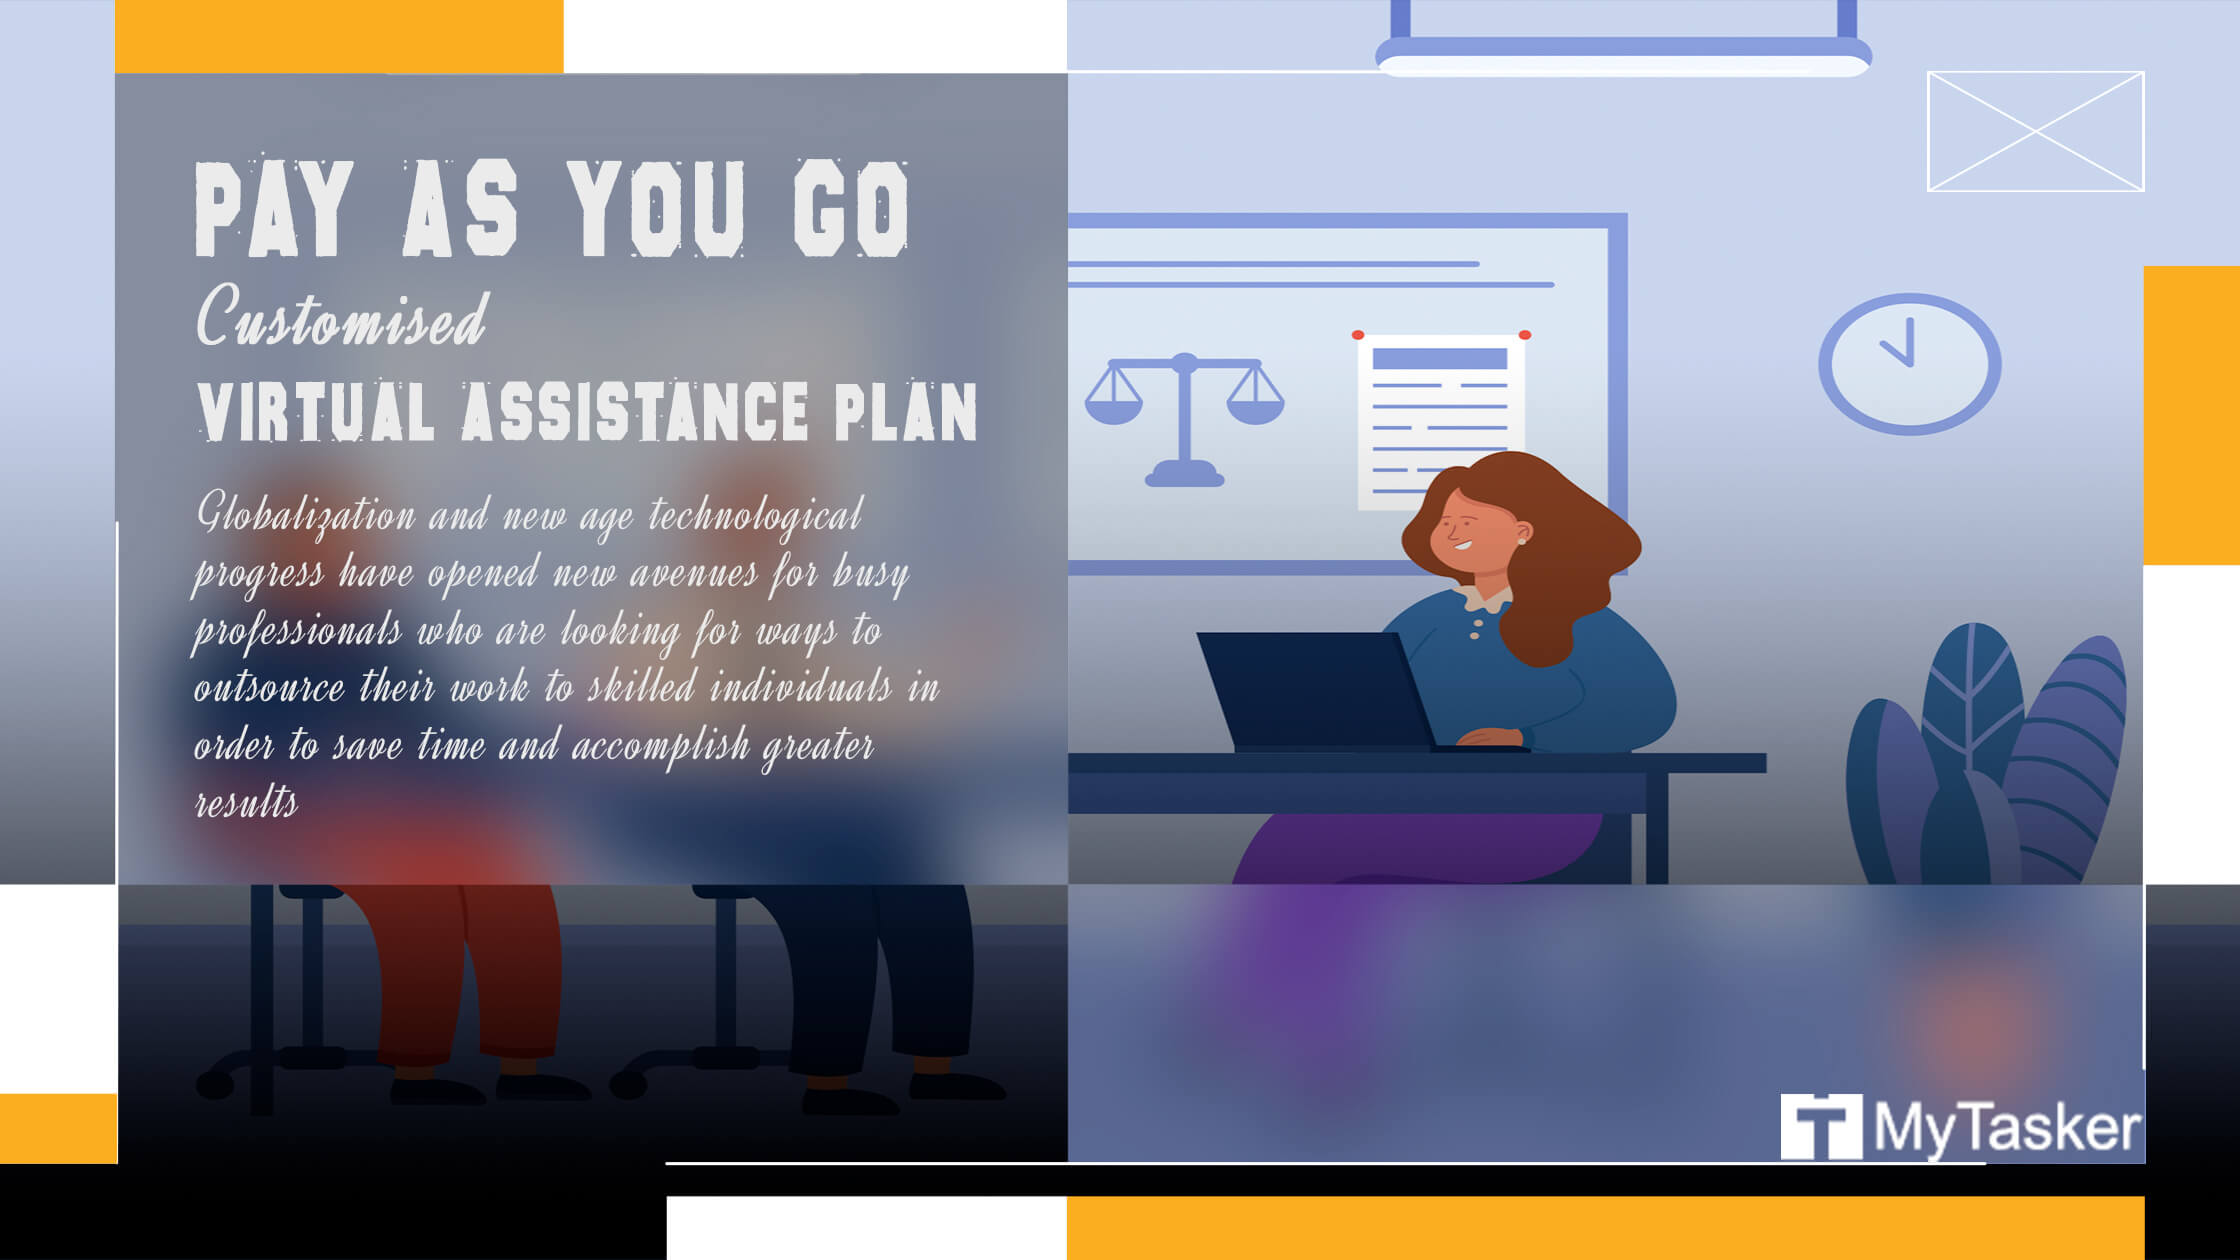 Pay As You Go: Customised Virtual Assistance Plan